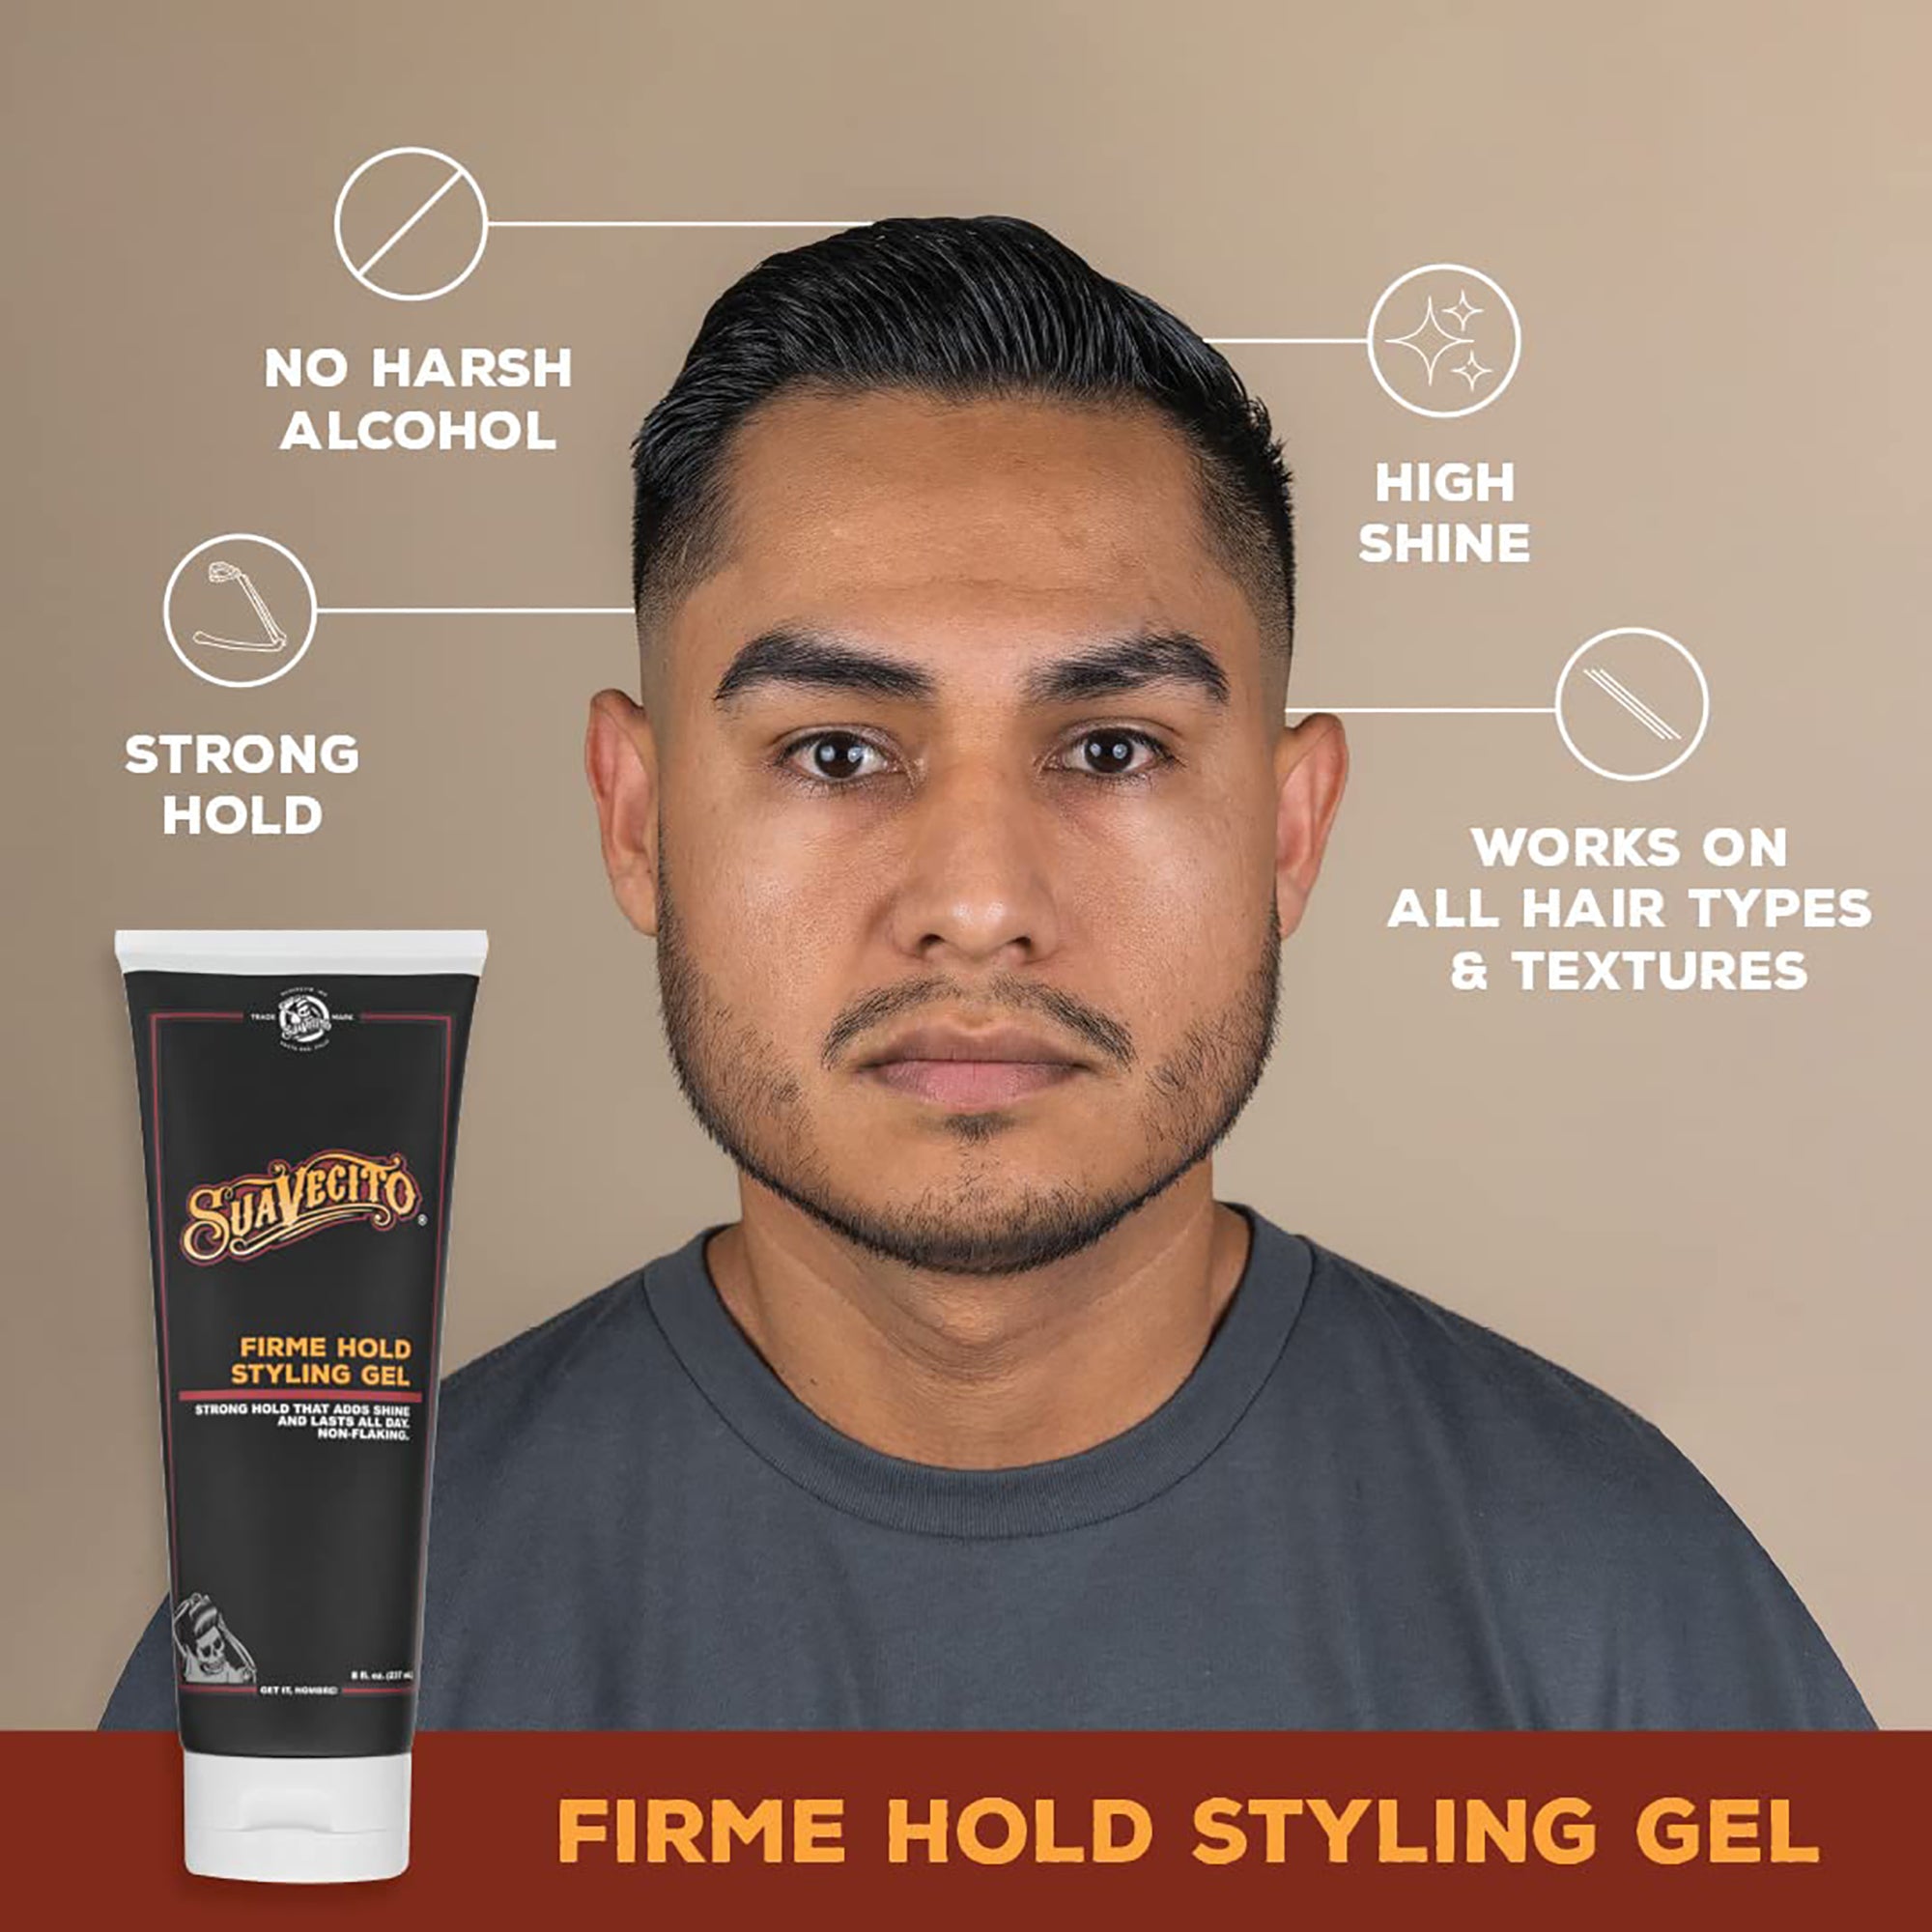 Suavecito Firme Hold Styling Gel / 8OZ